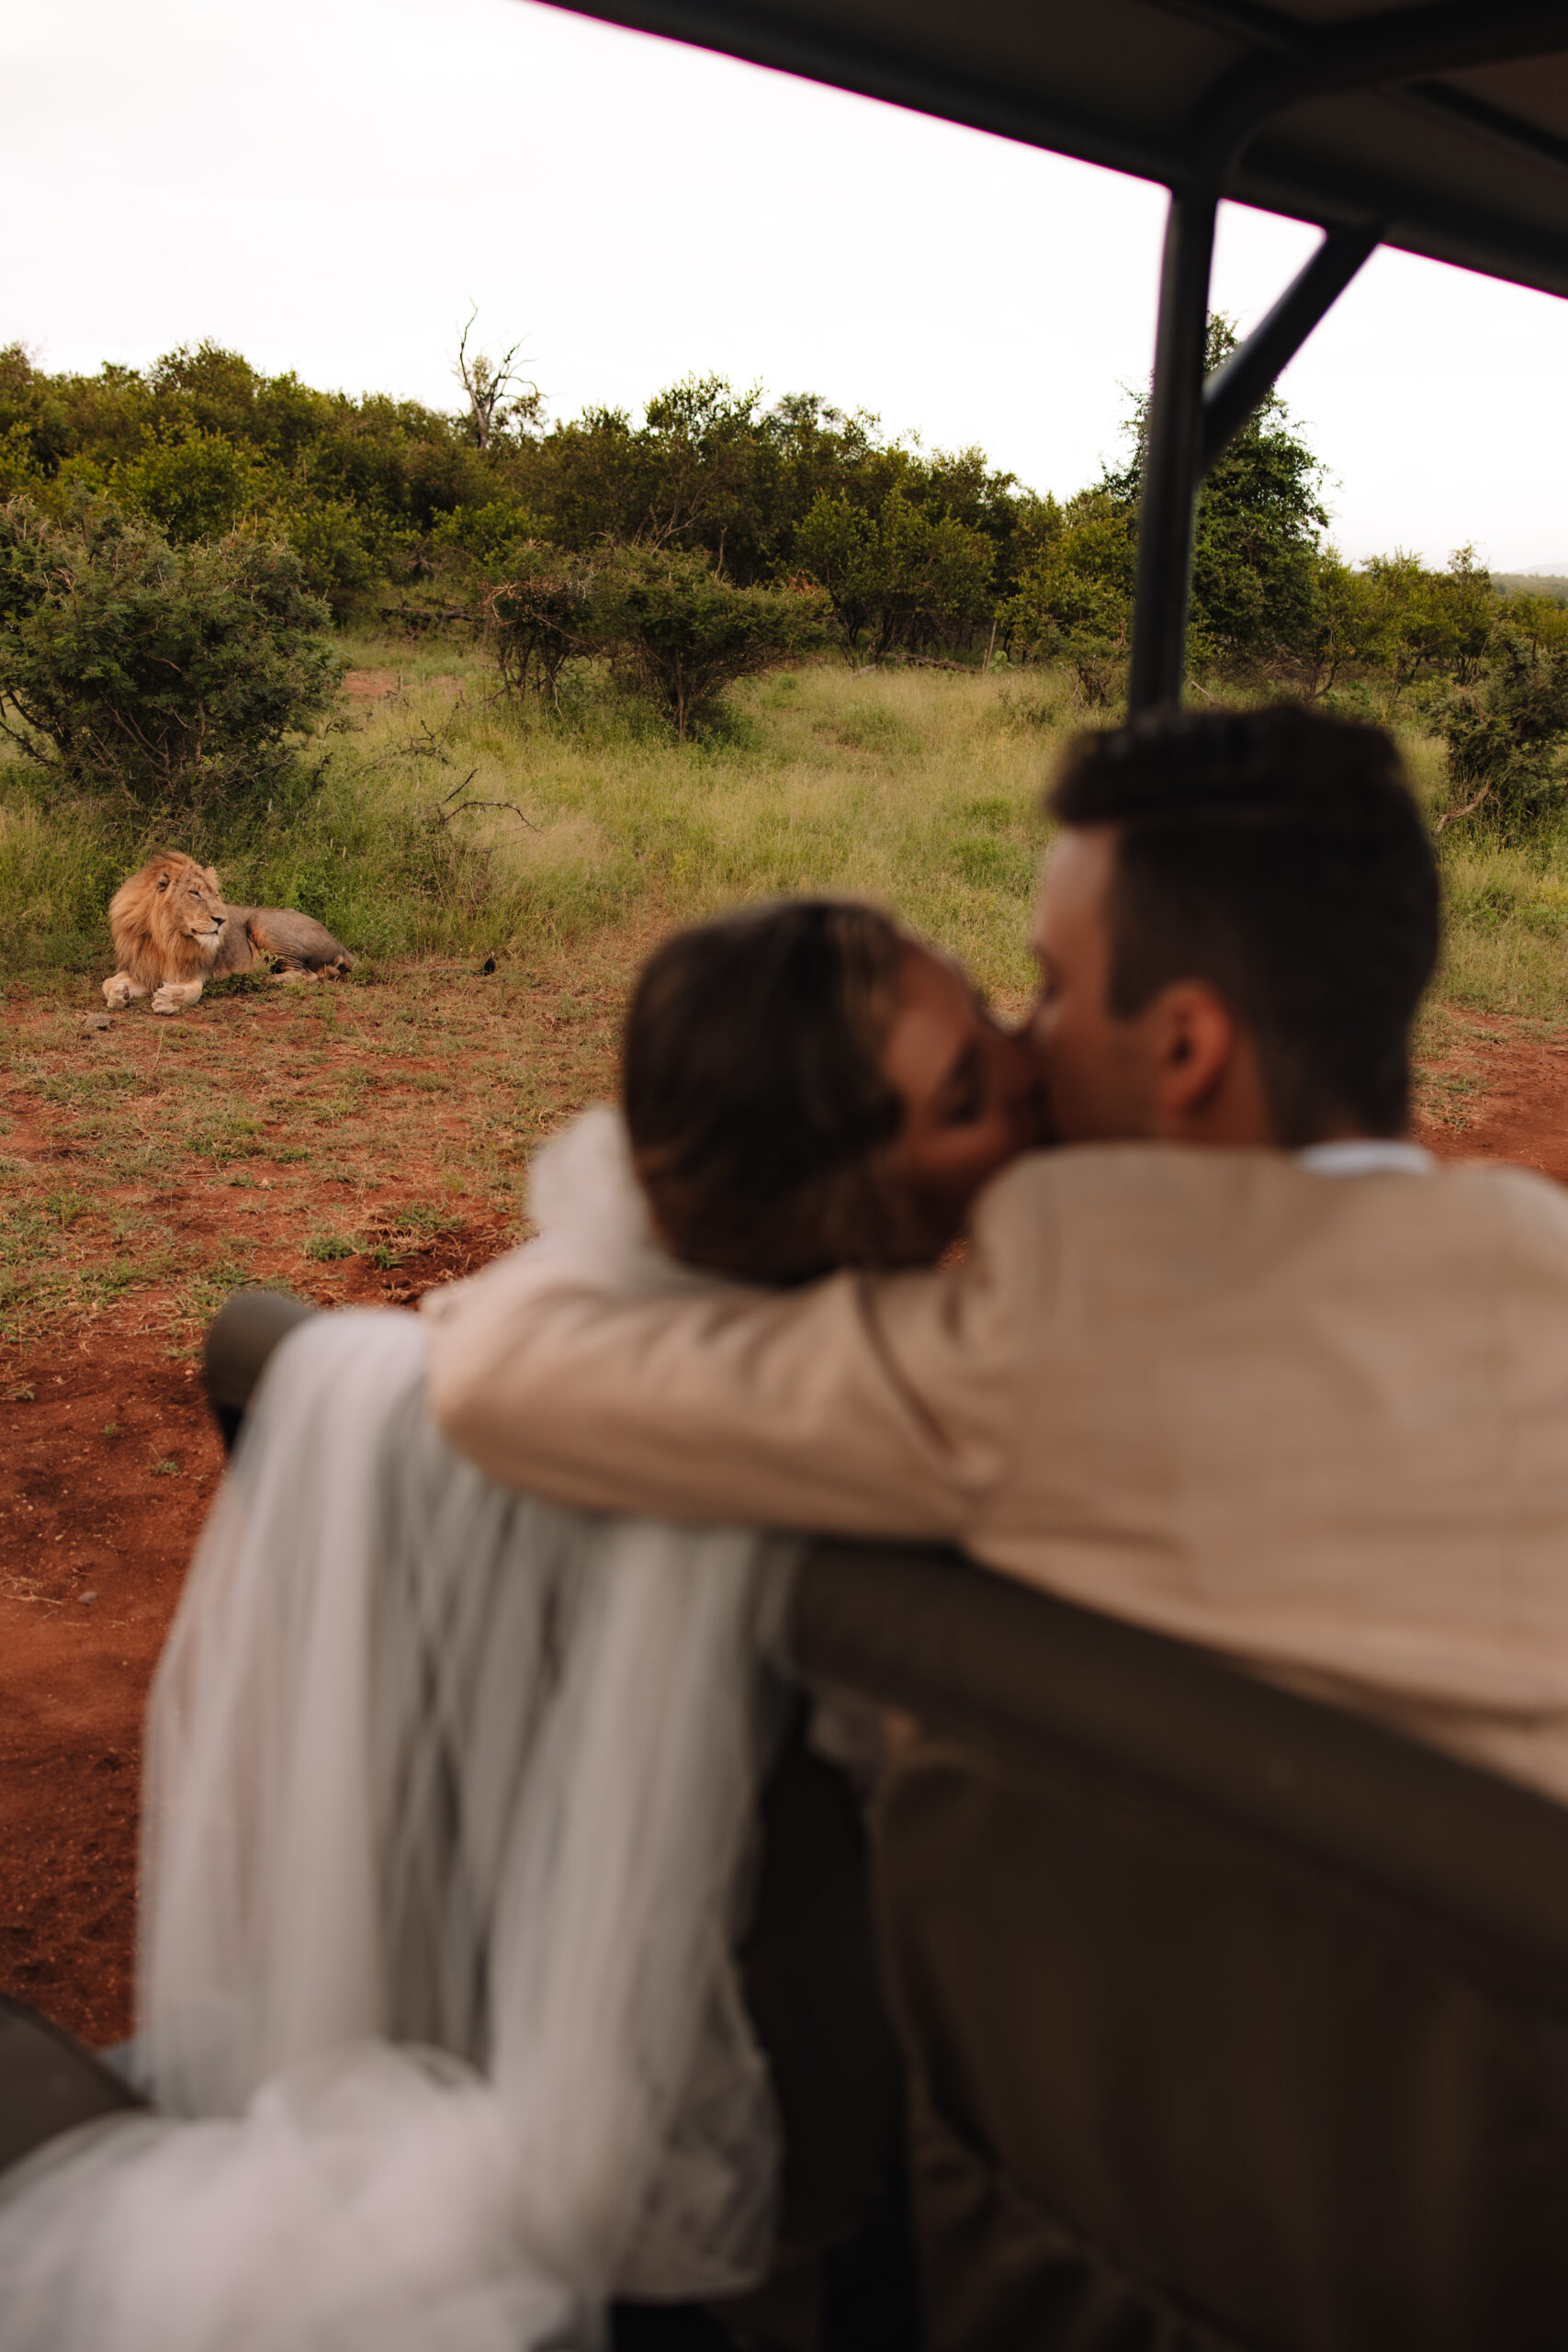 A couple in wedding attire shares a kiss in a safari vehicle while a lion rests in the grass nearby.